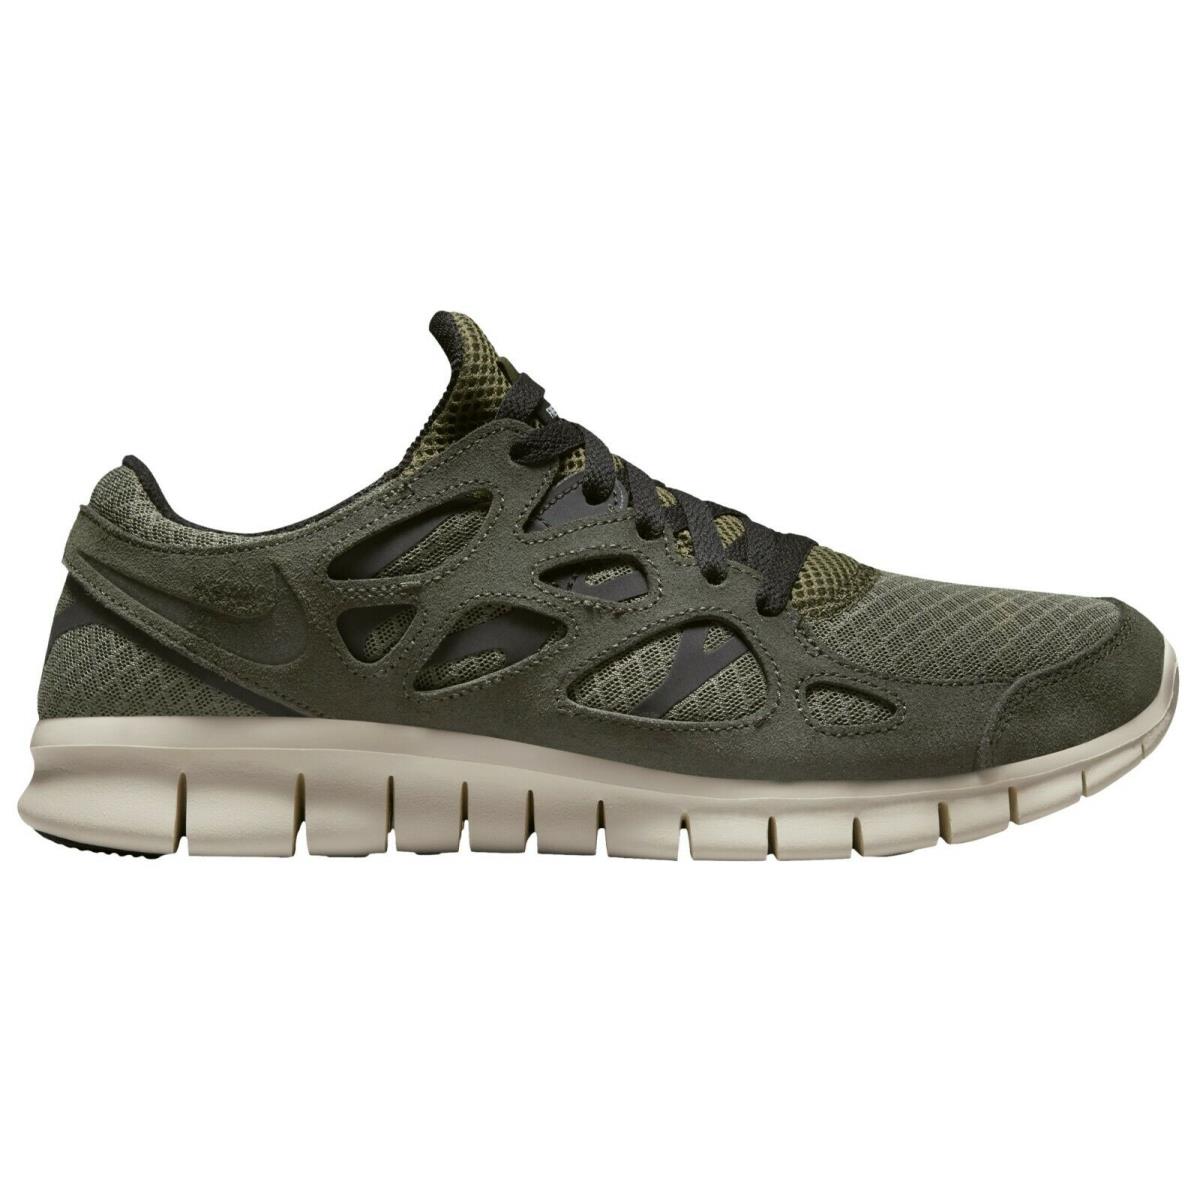 Nike Free Run 2 Mens 537732-305 Sequoia Olive Sail Black Running Shoes Size 11.5